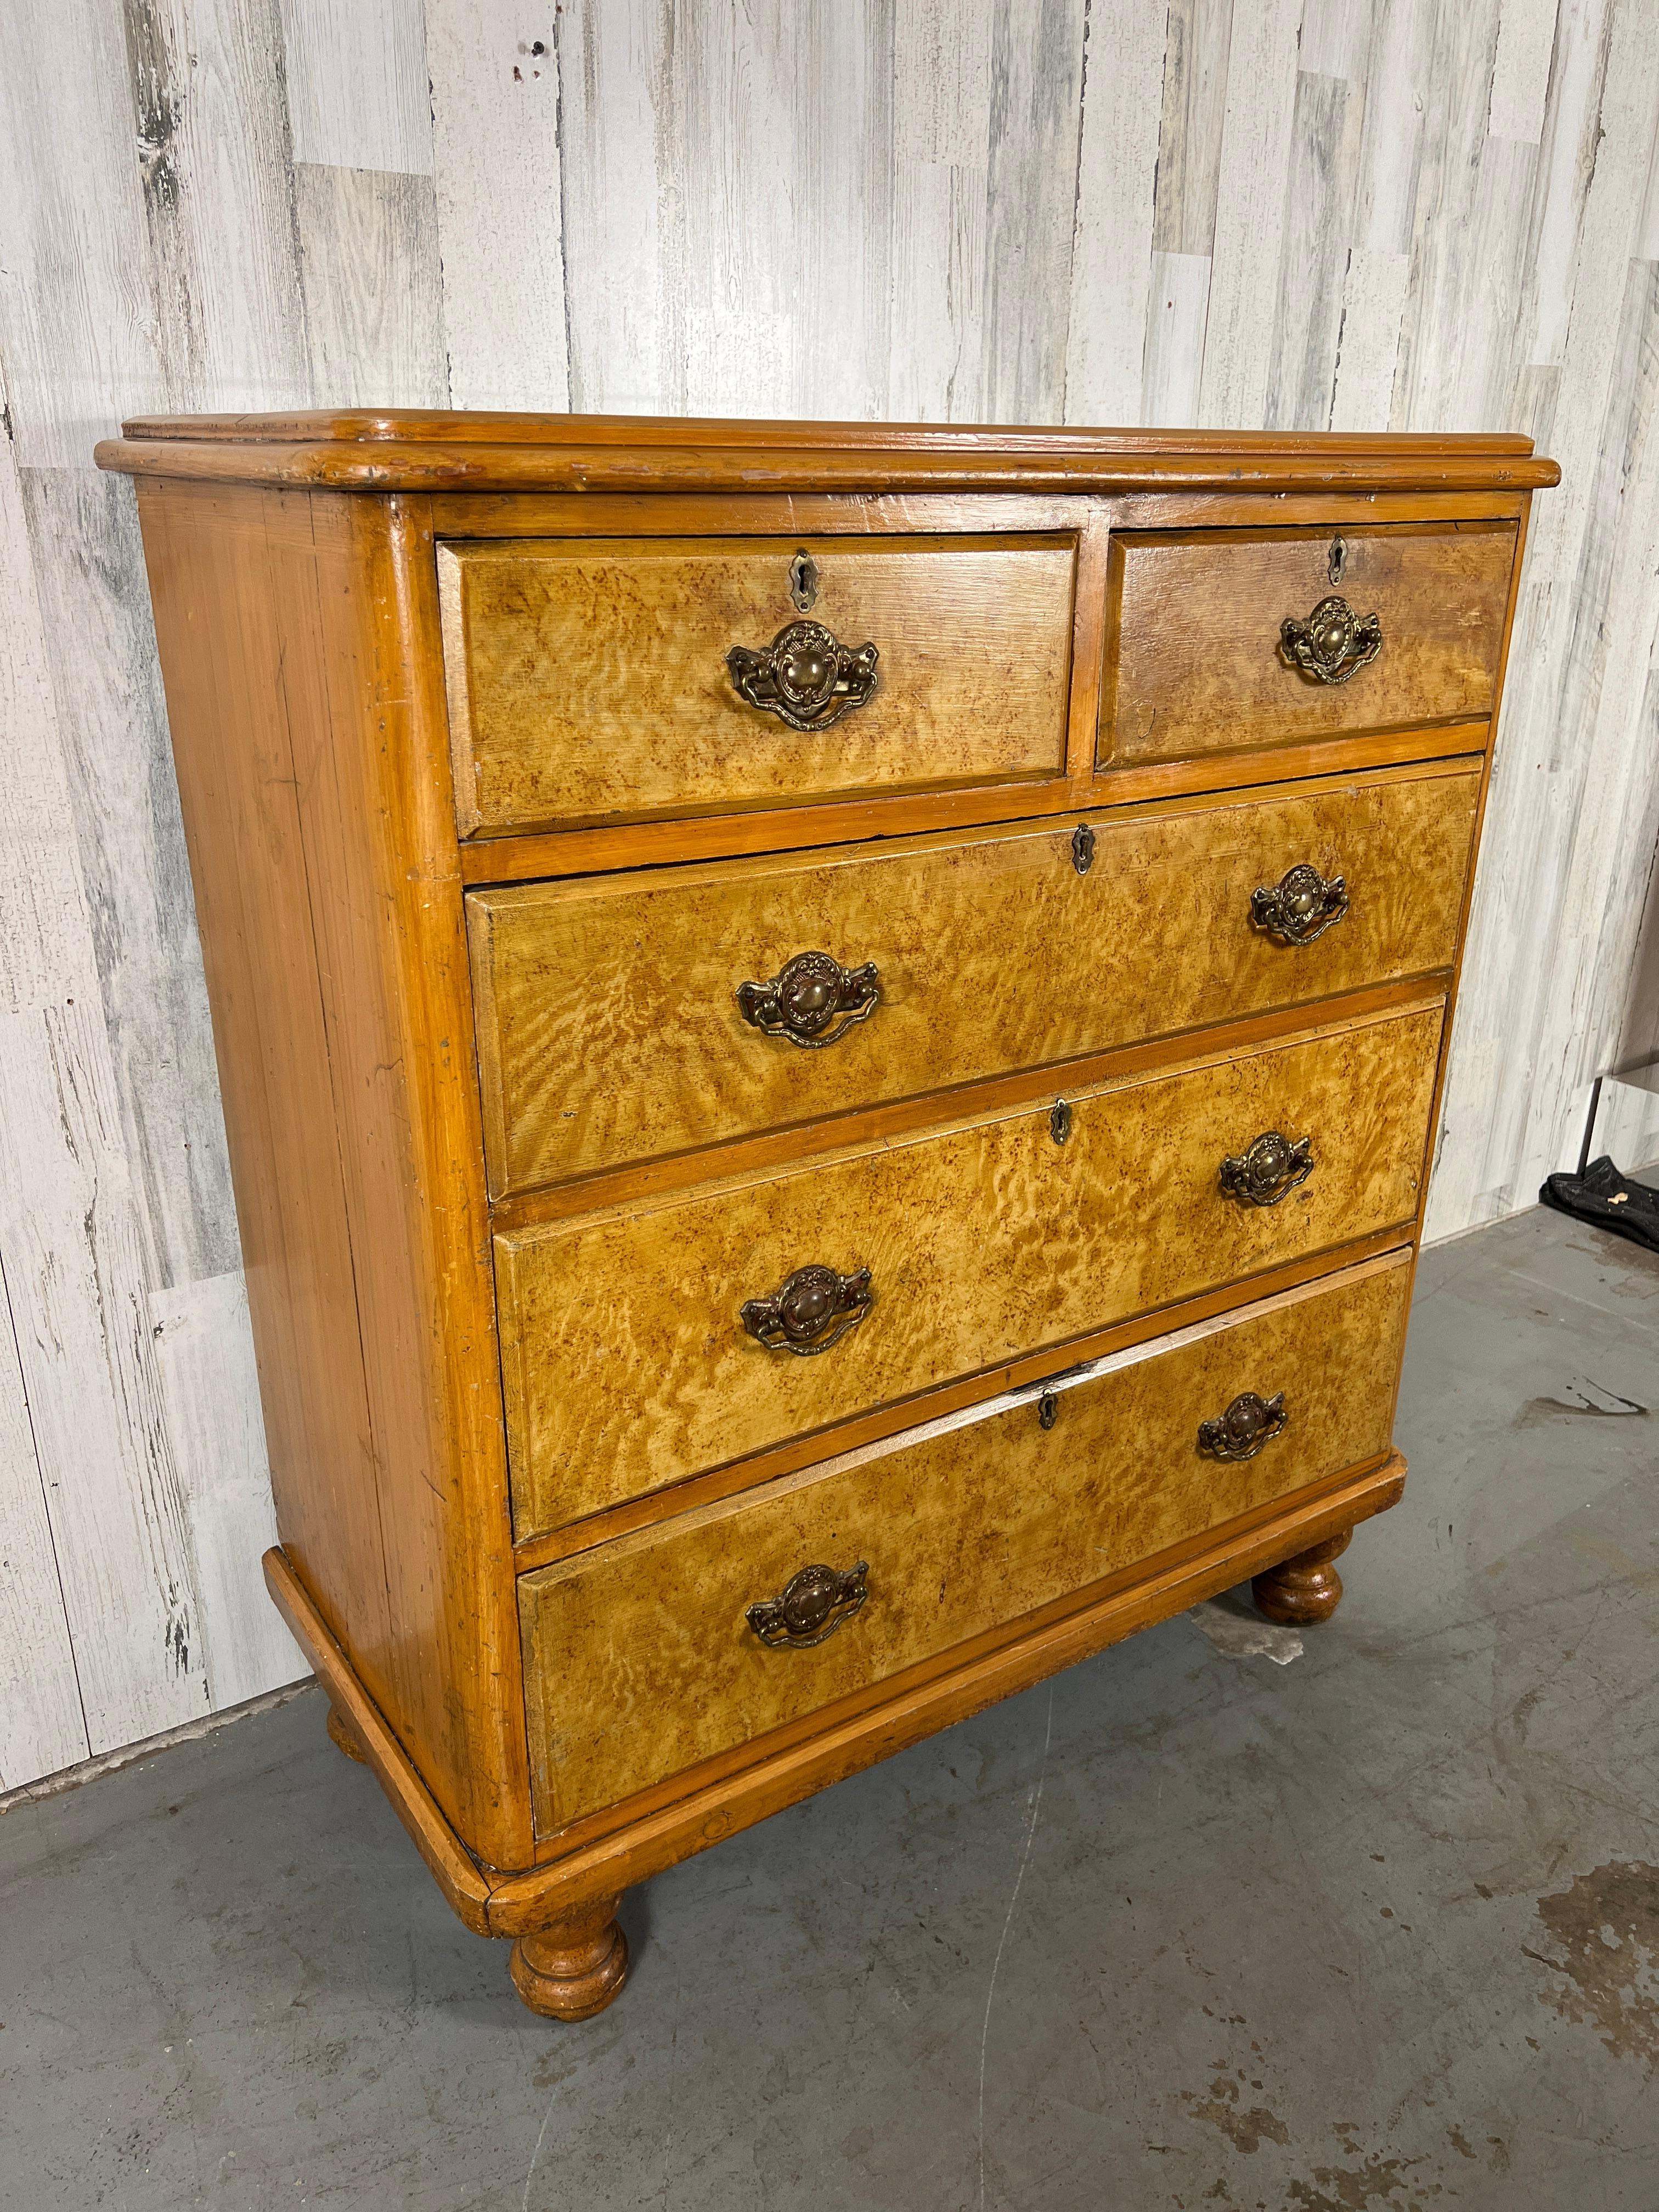 Swedish Faux Painted Grain Chest of Drawers In Good Condition For Sale In Denton, TX